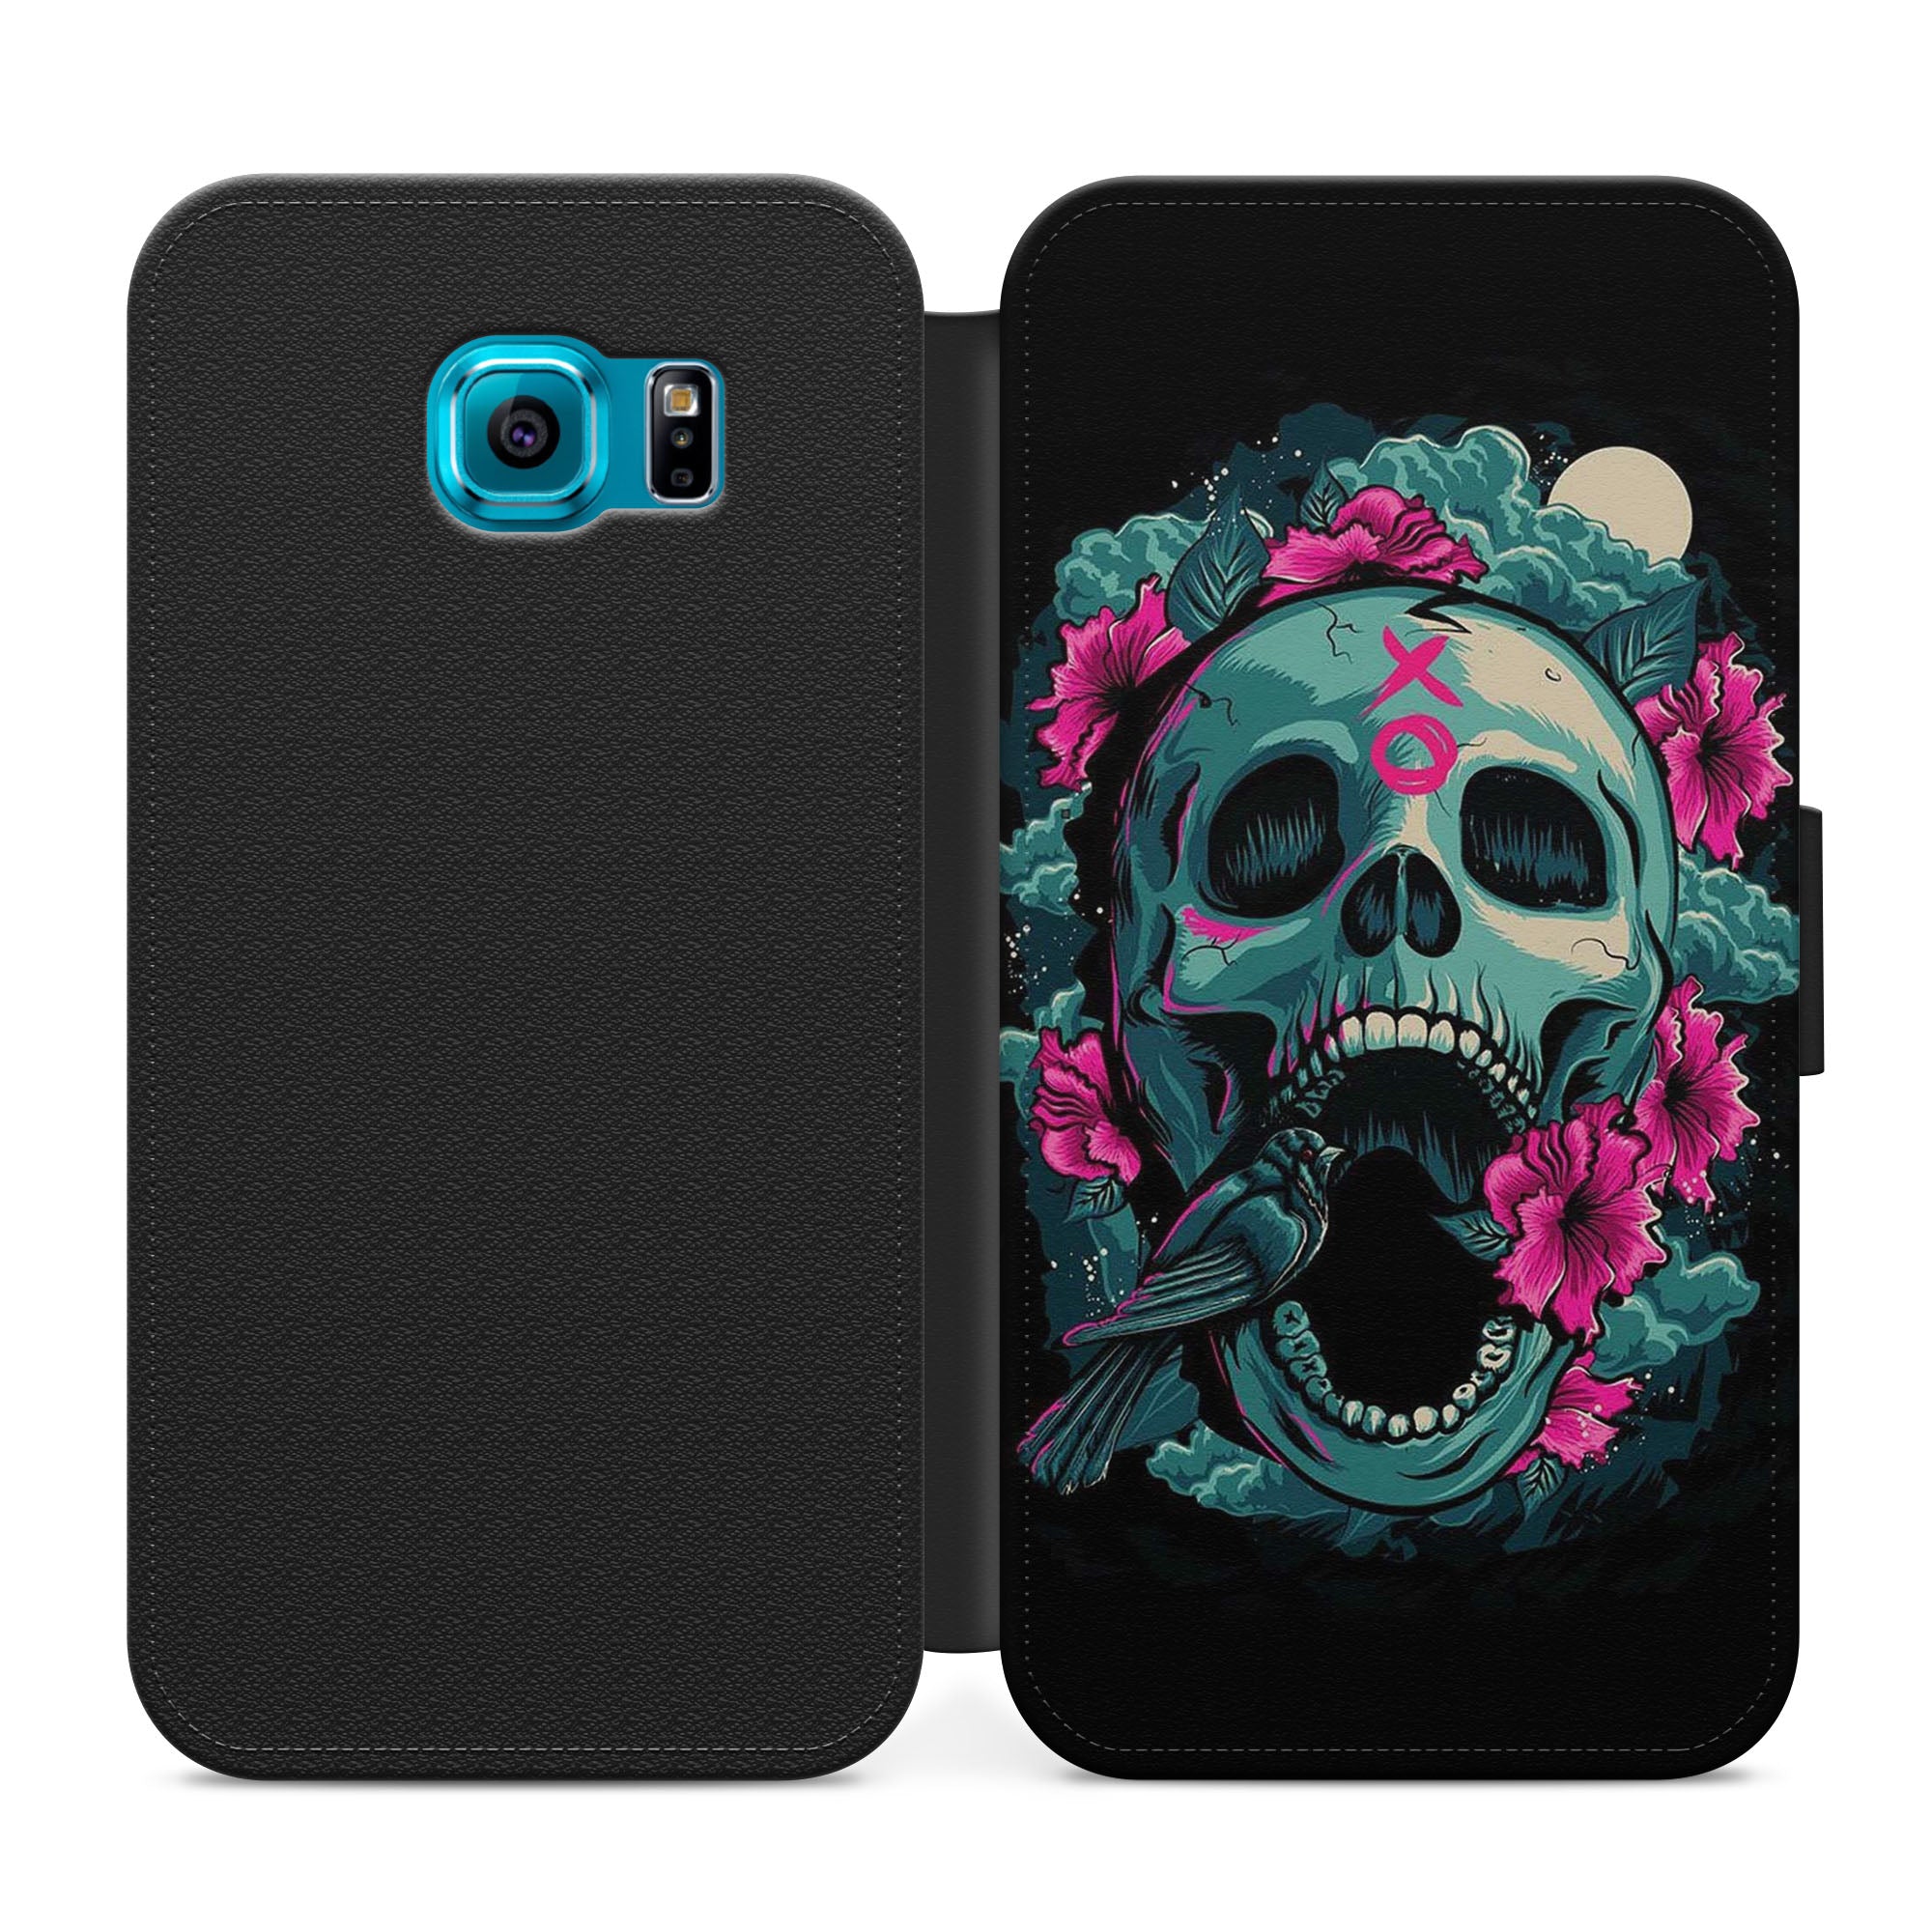 Skull Floral Faux Leather Flip Case Wallet for iPhone / Samsung